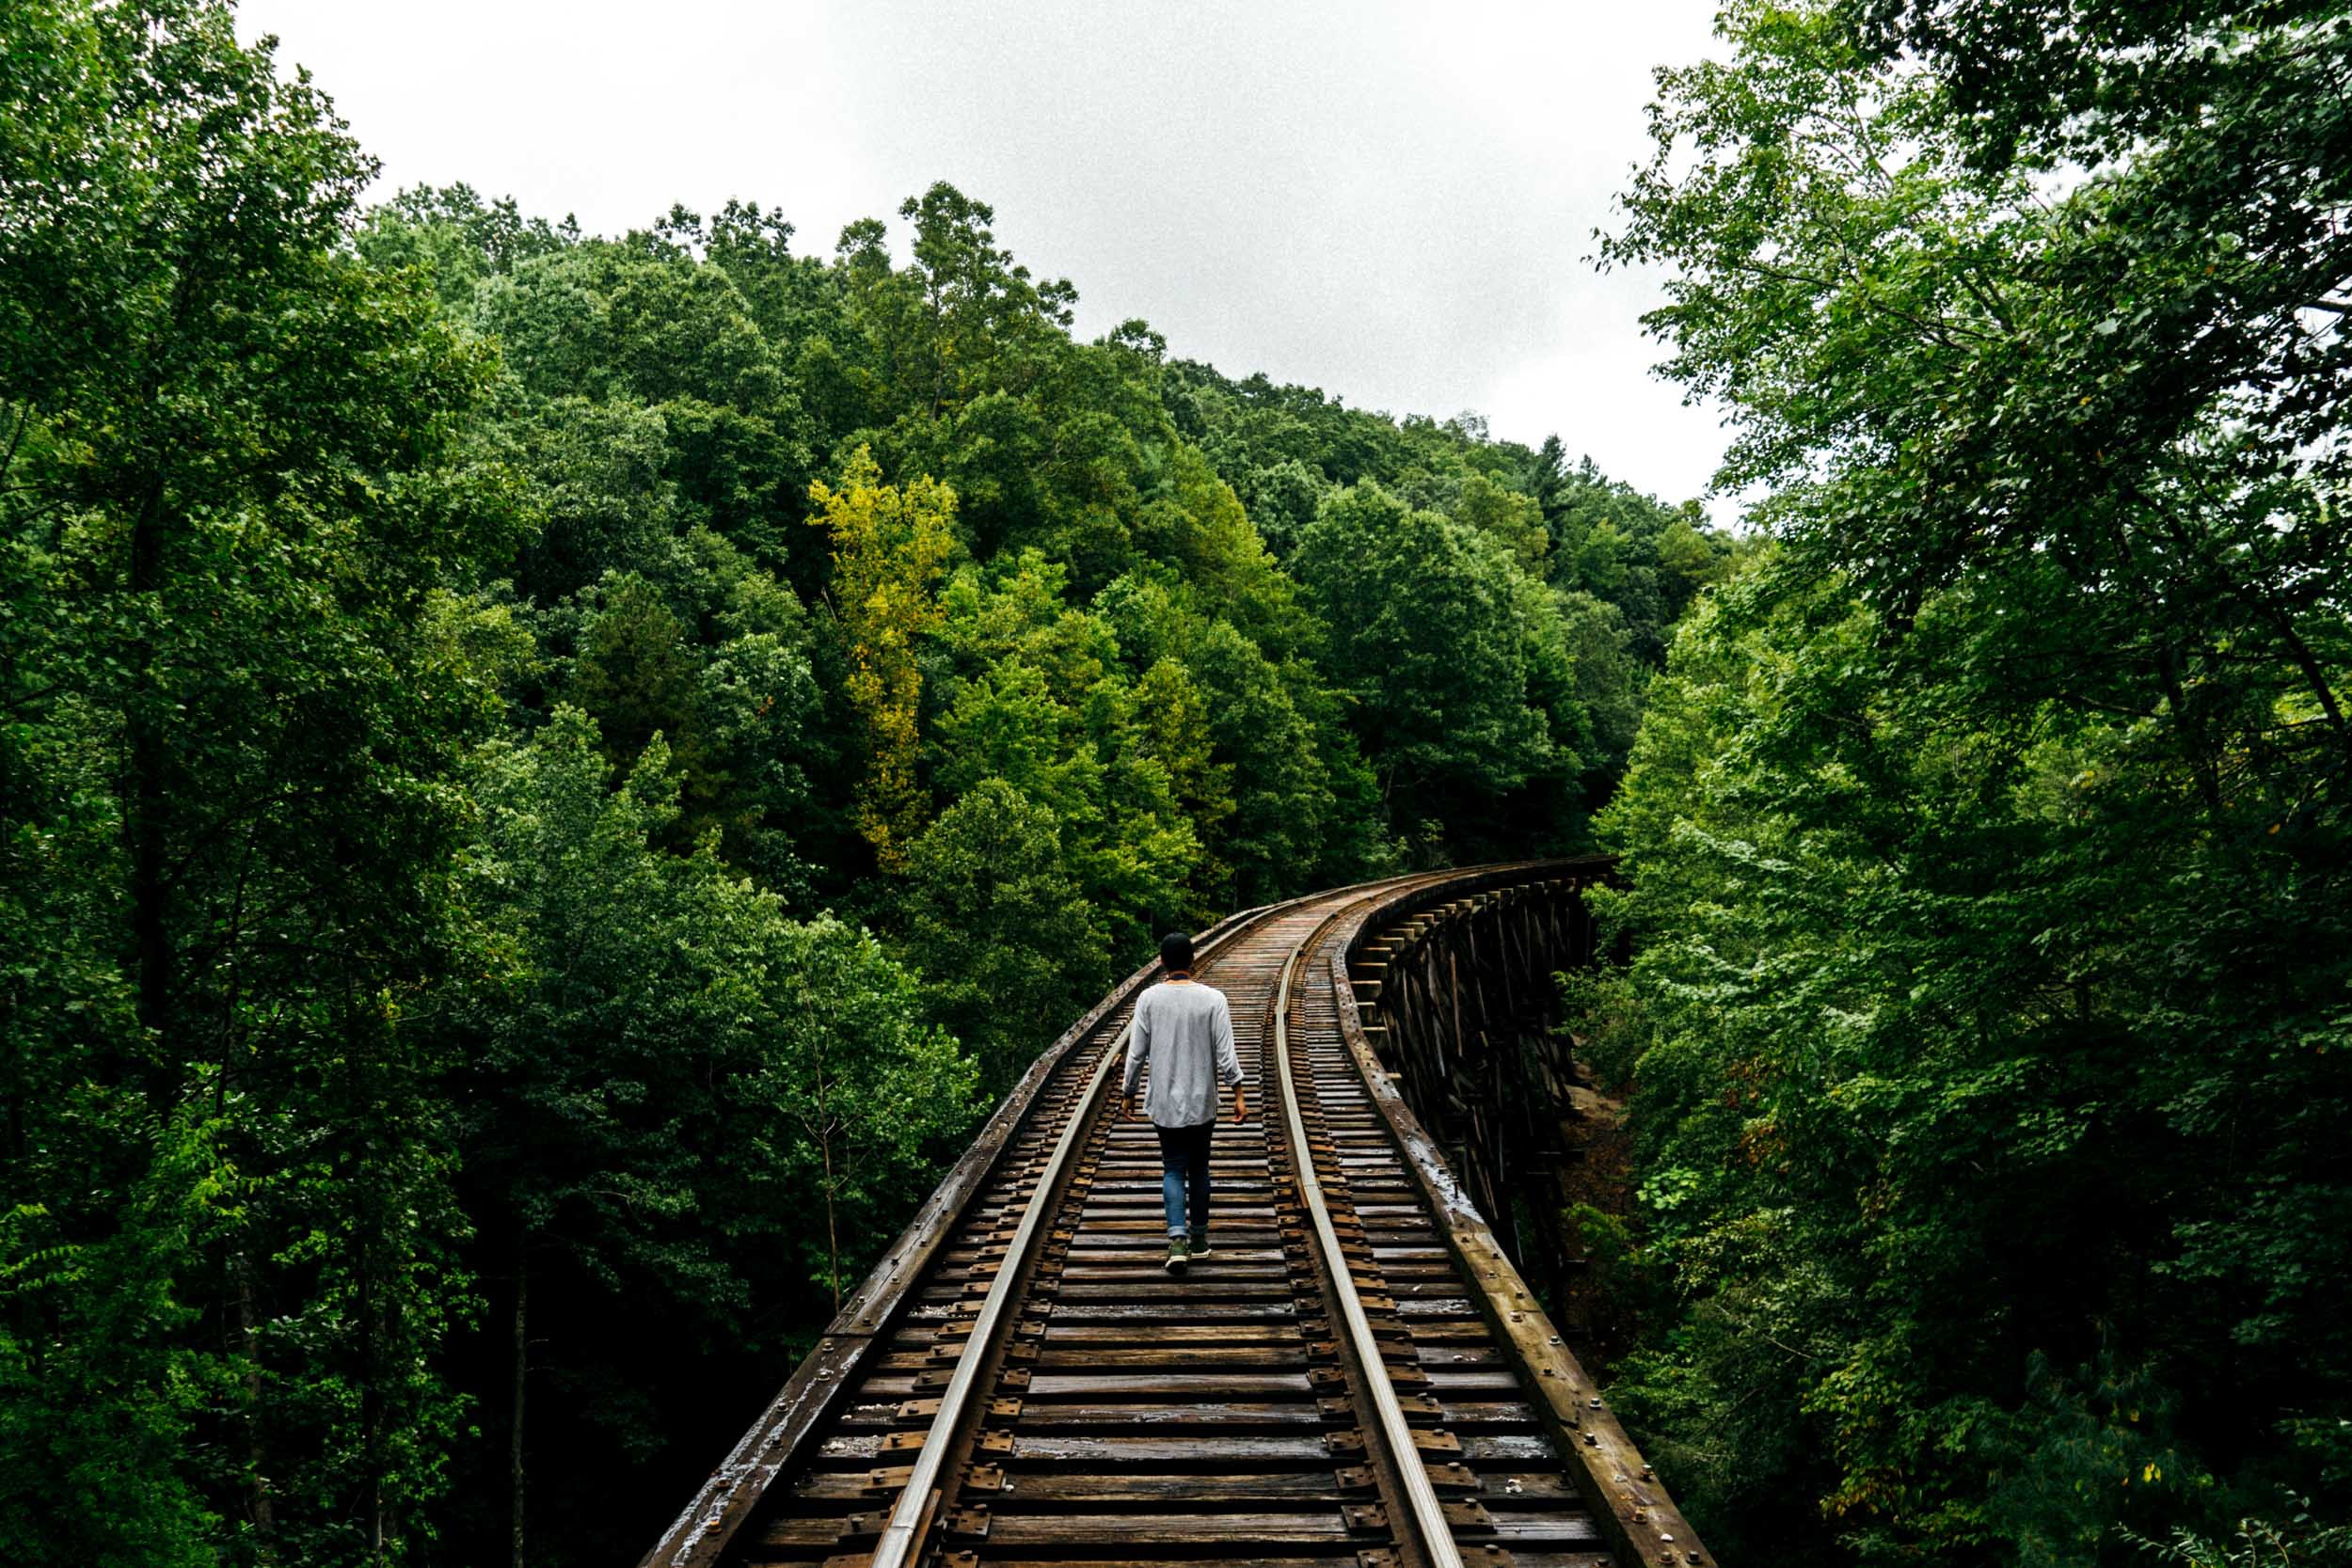 New Lock Screen Wallpapers person, nature, trees, stroll, human, railway